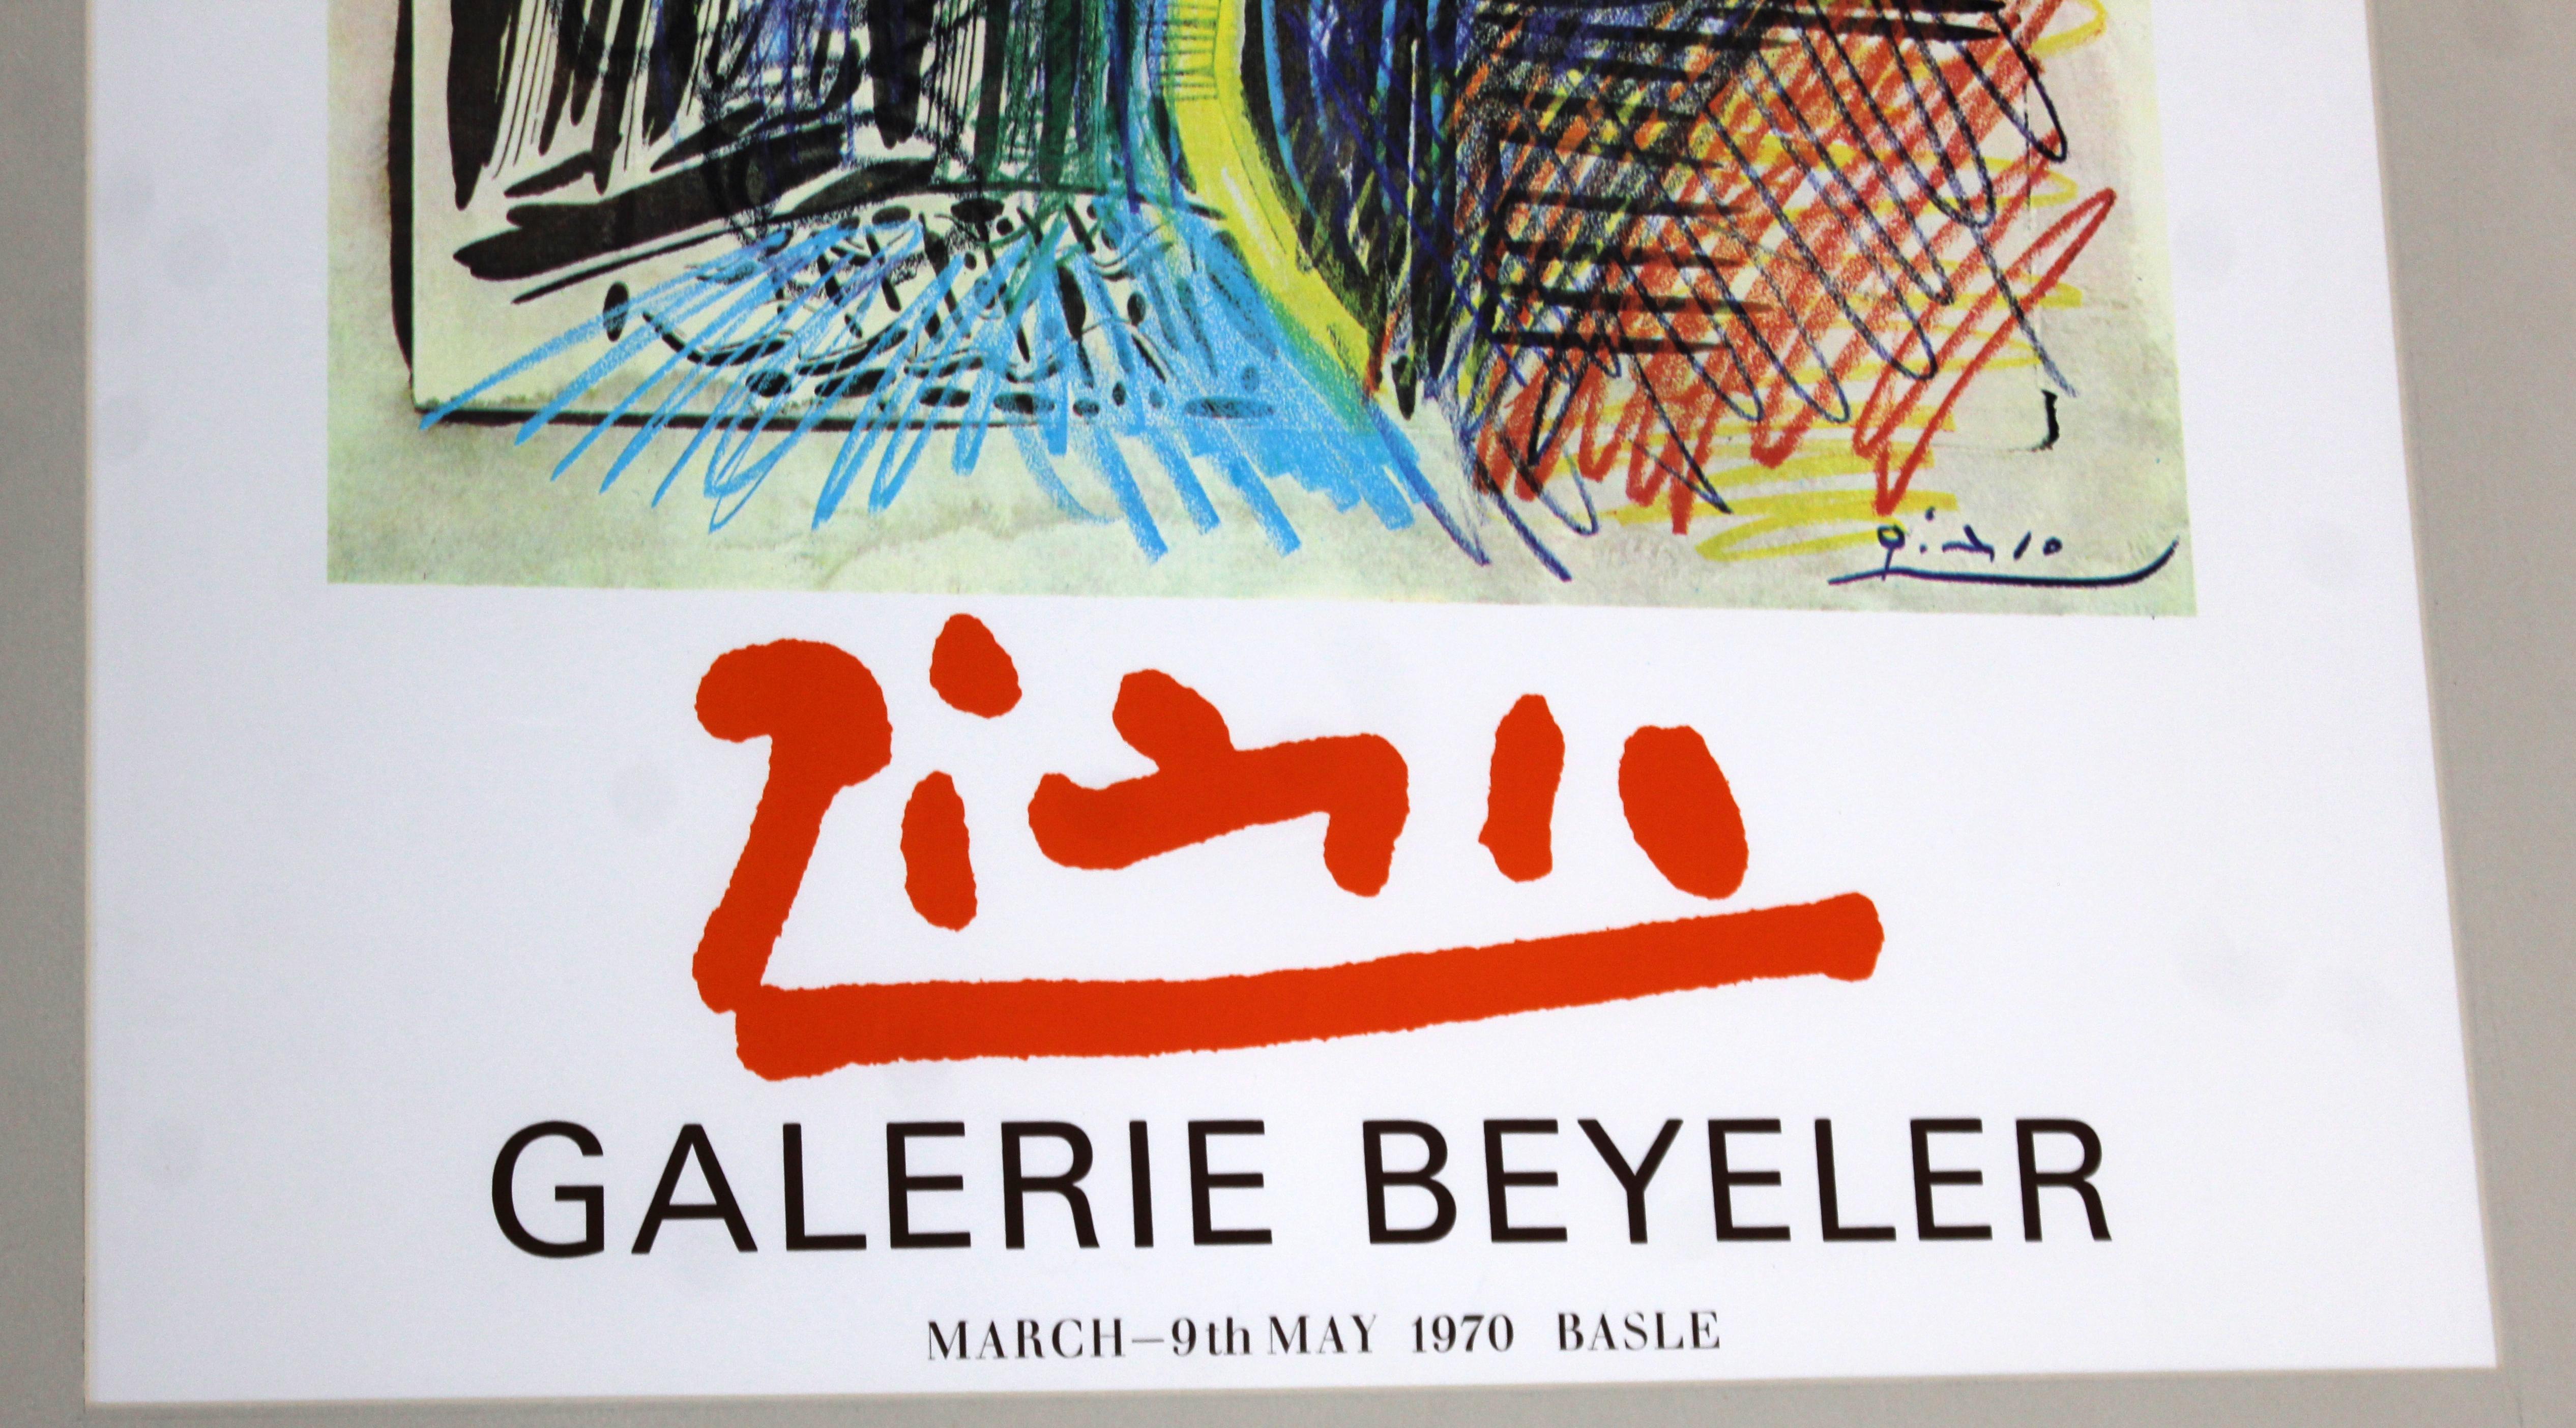 For your consideration is an unframed, vintage, Pablo Picasso Galerie Beyeler 1970 Poster, Paris. In excellent condition. The dimensions are 19